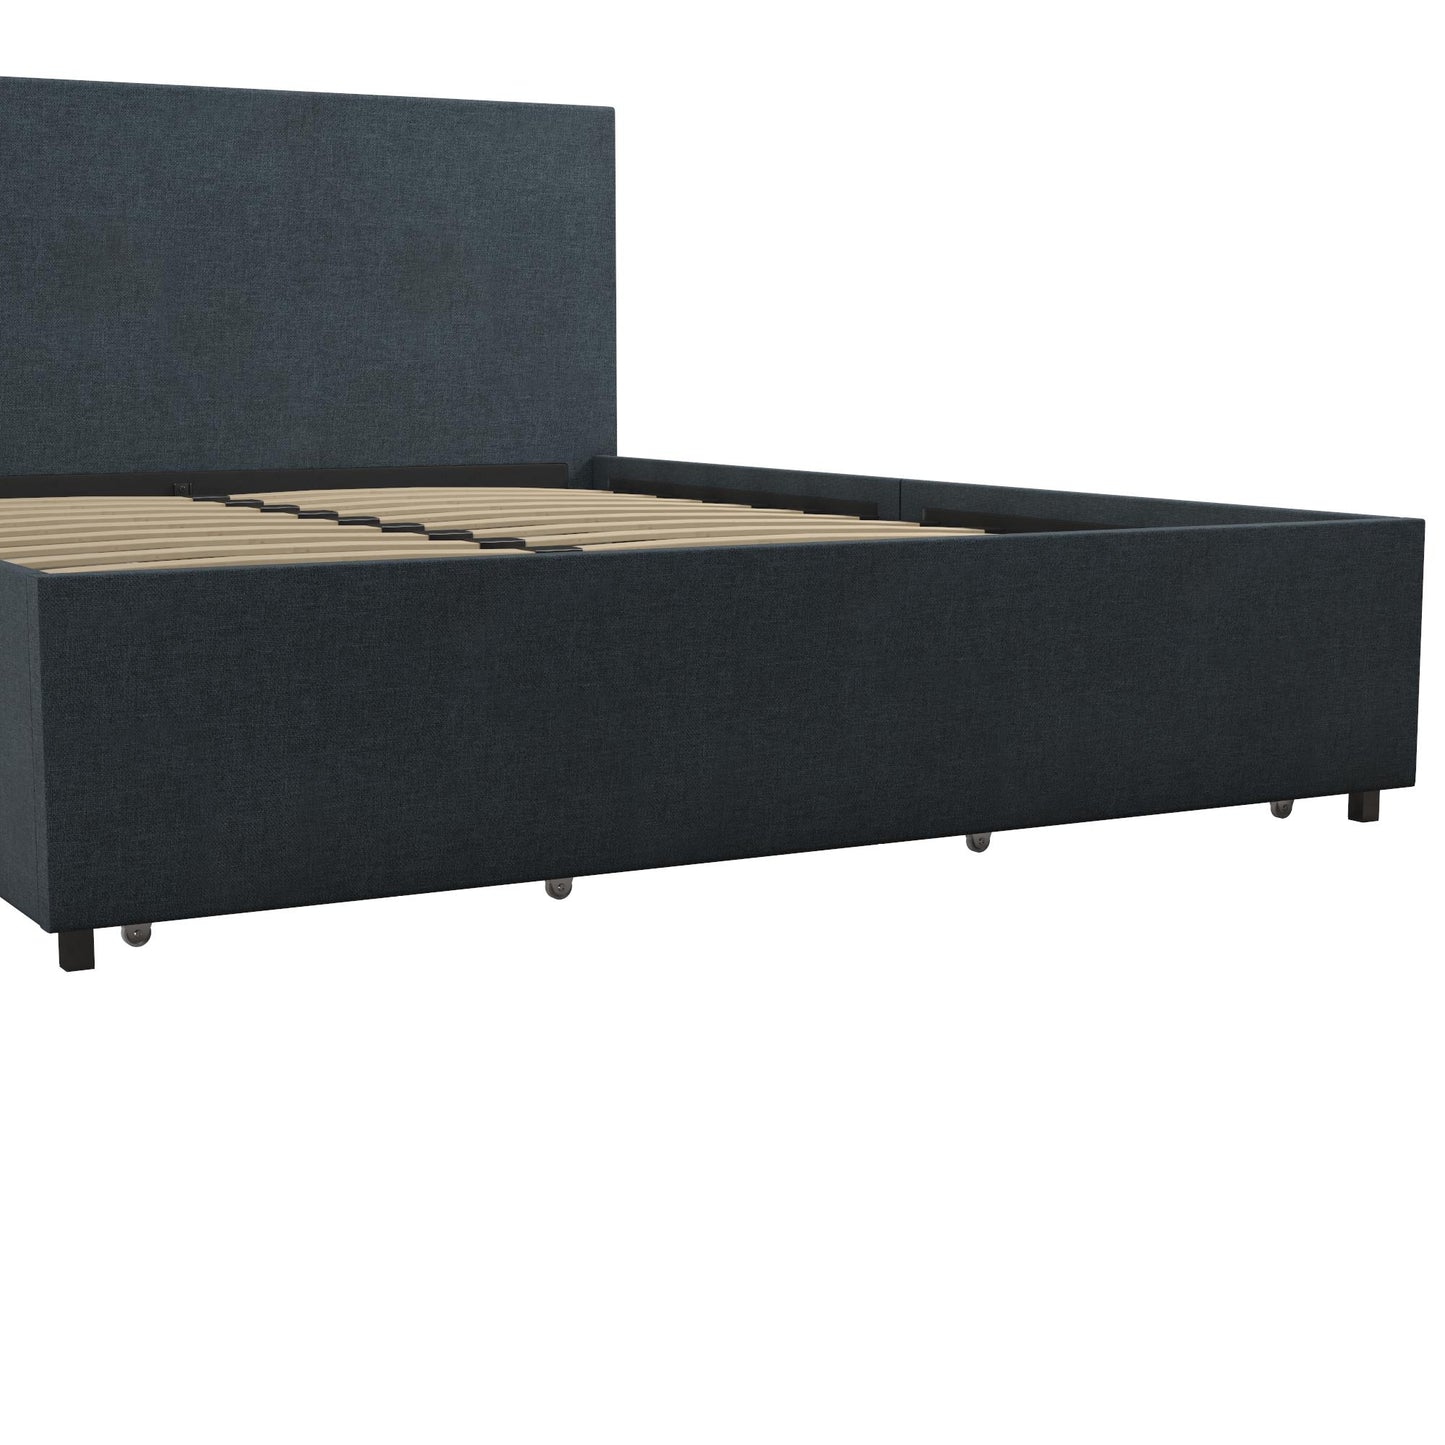 Kelly Upholstered Bed with Storage - Navy - Queen